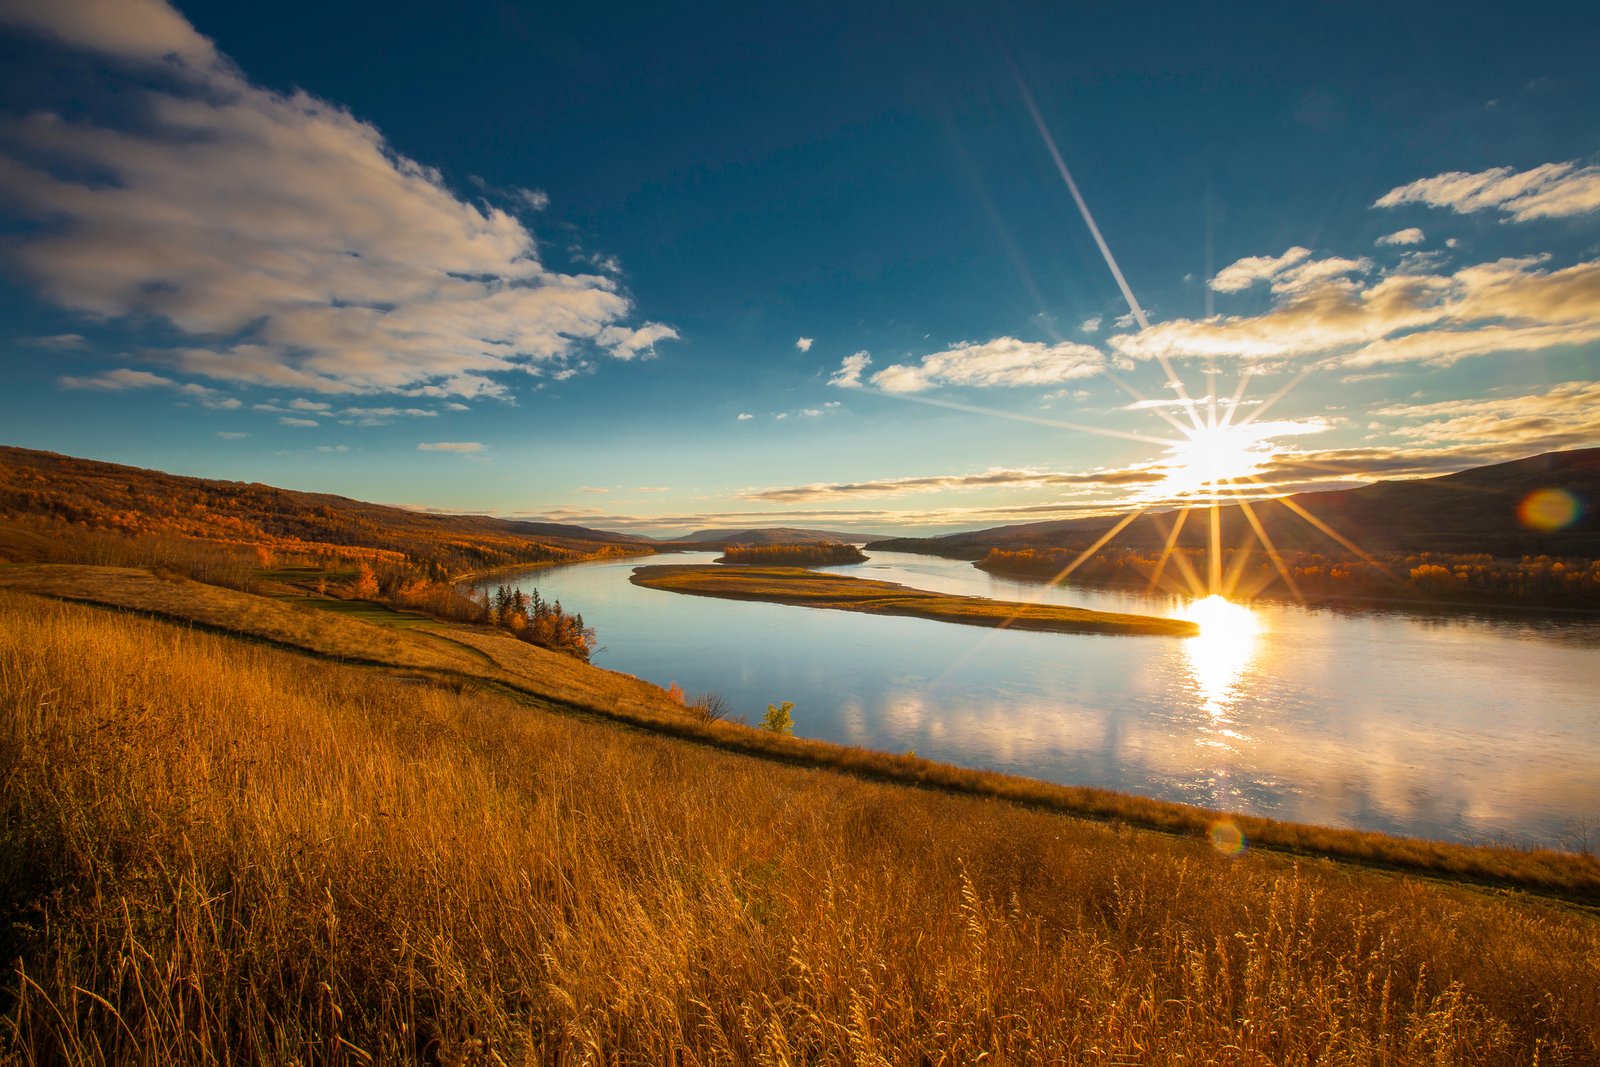 A sunset over a body of water in the Peace River Valley.